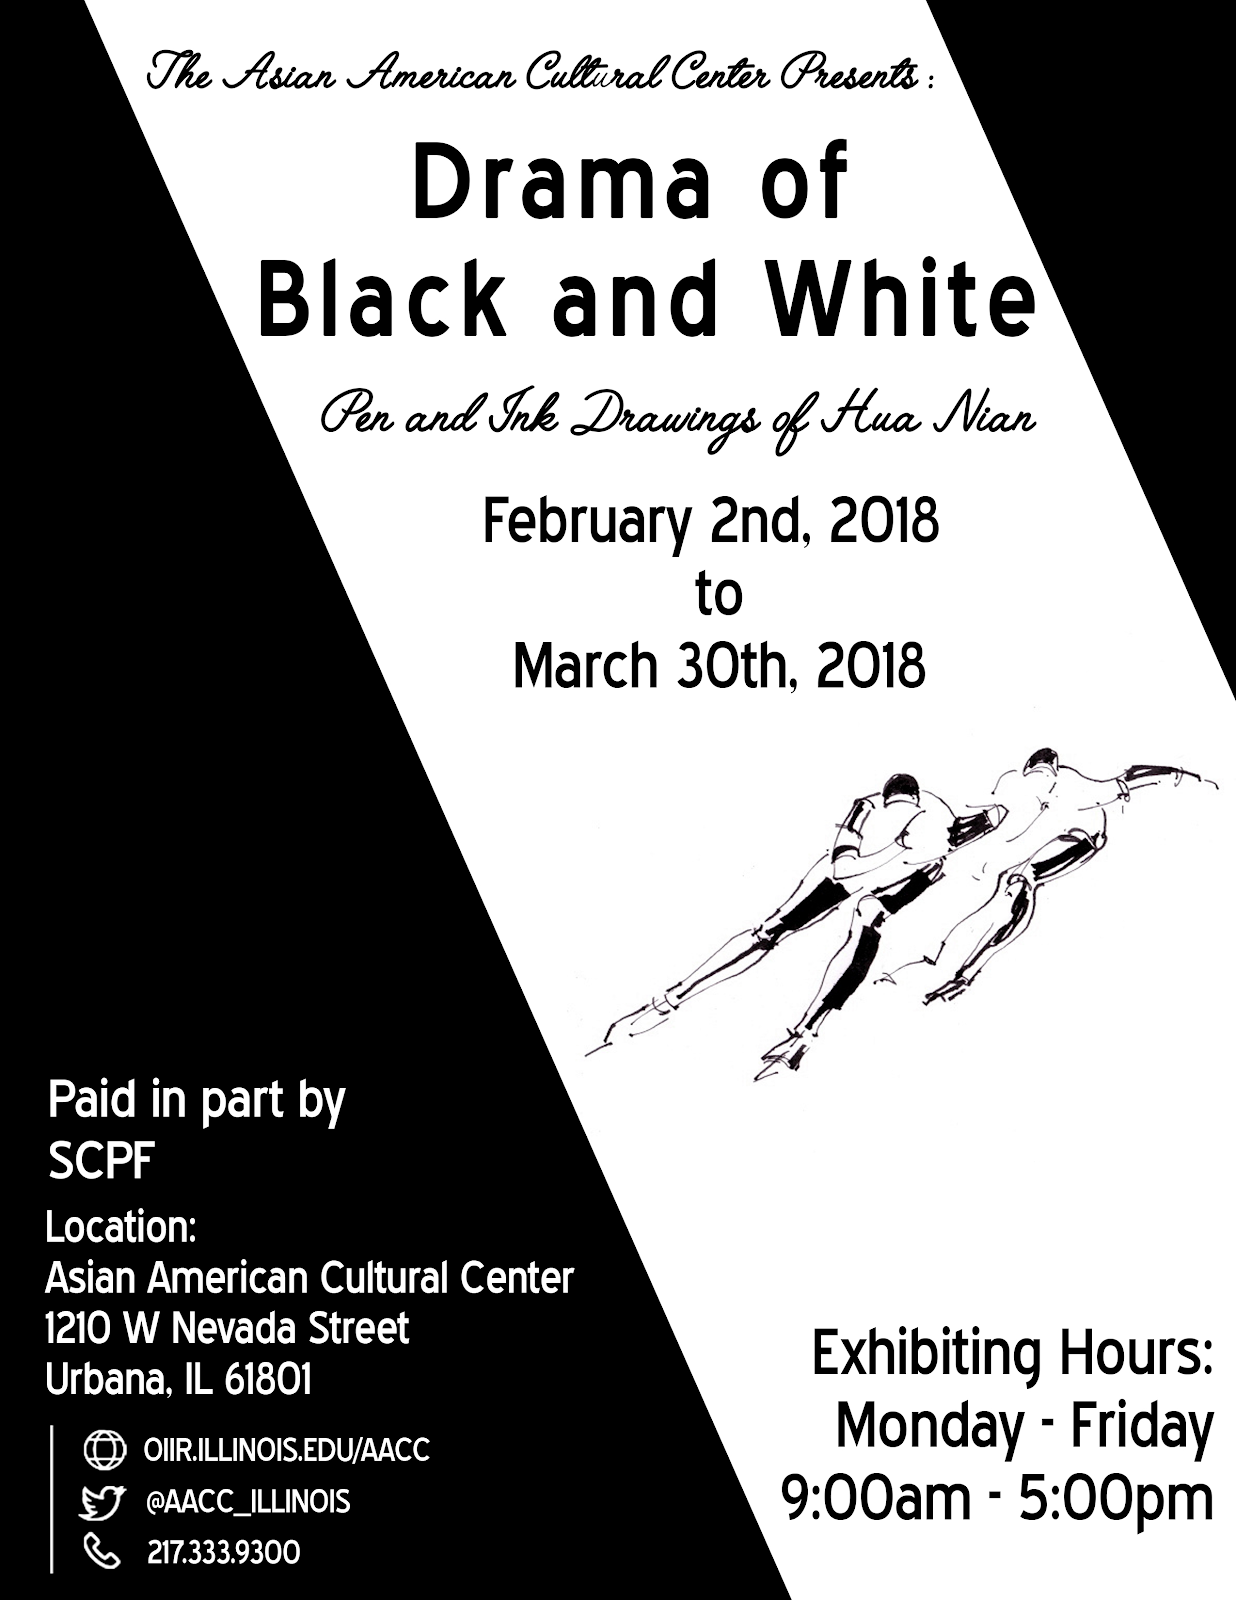 Drama of Black and White poster featuring ink drawing of two speed skating figures in a white angled stripe down middle of black background